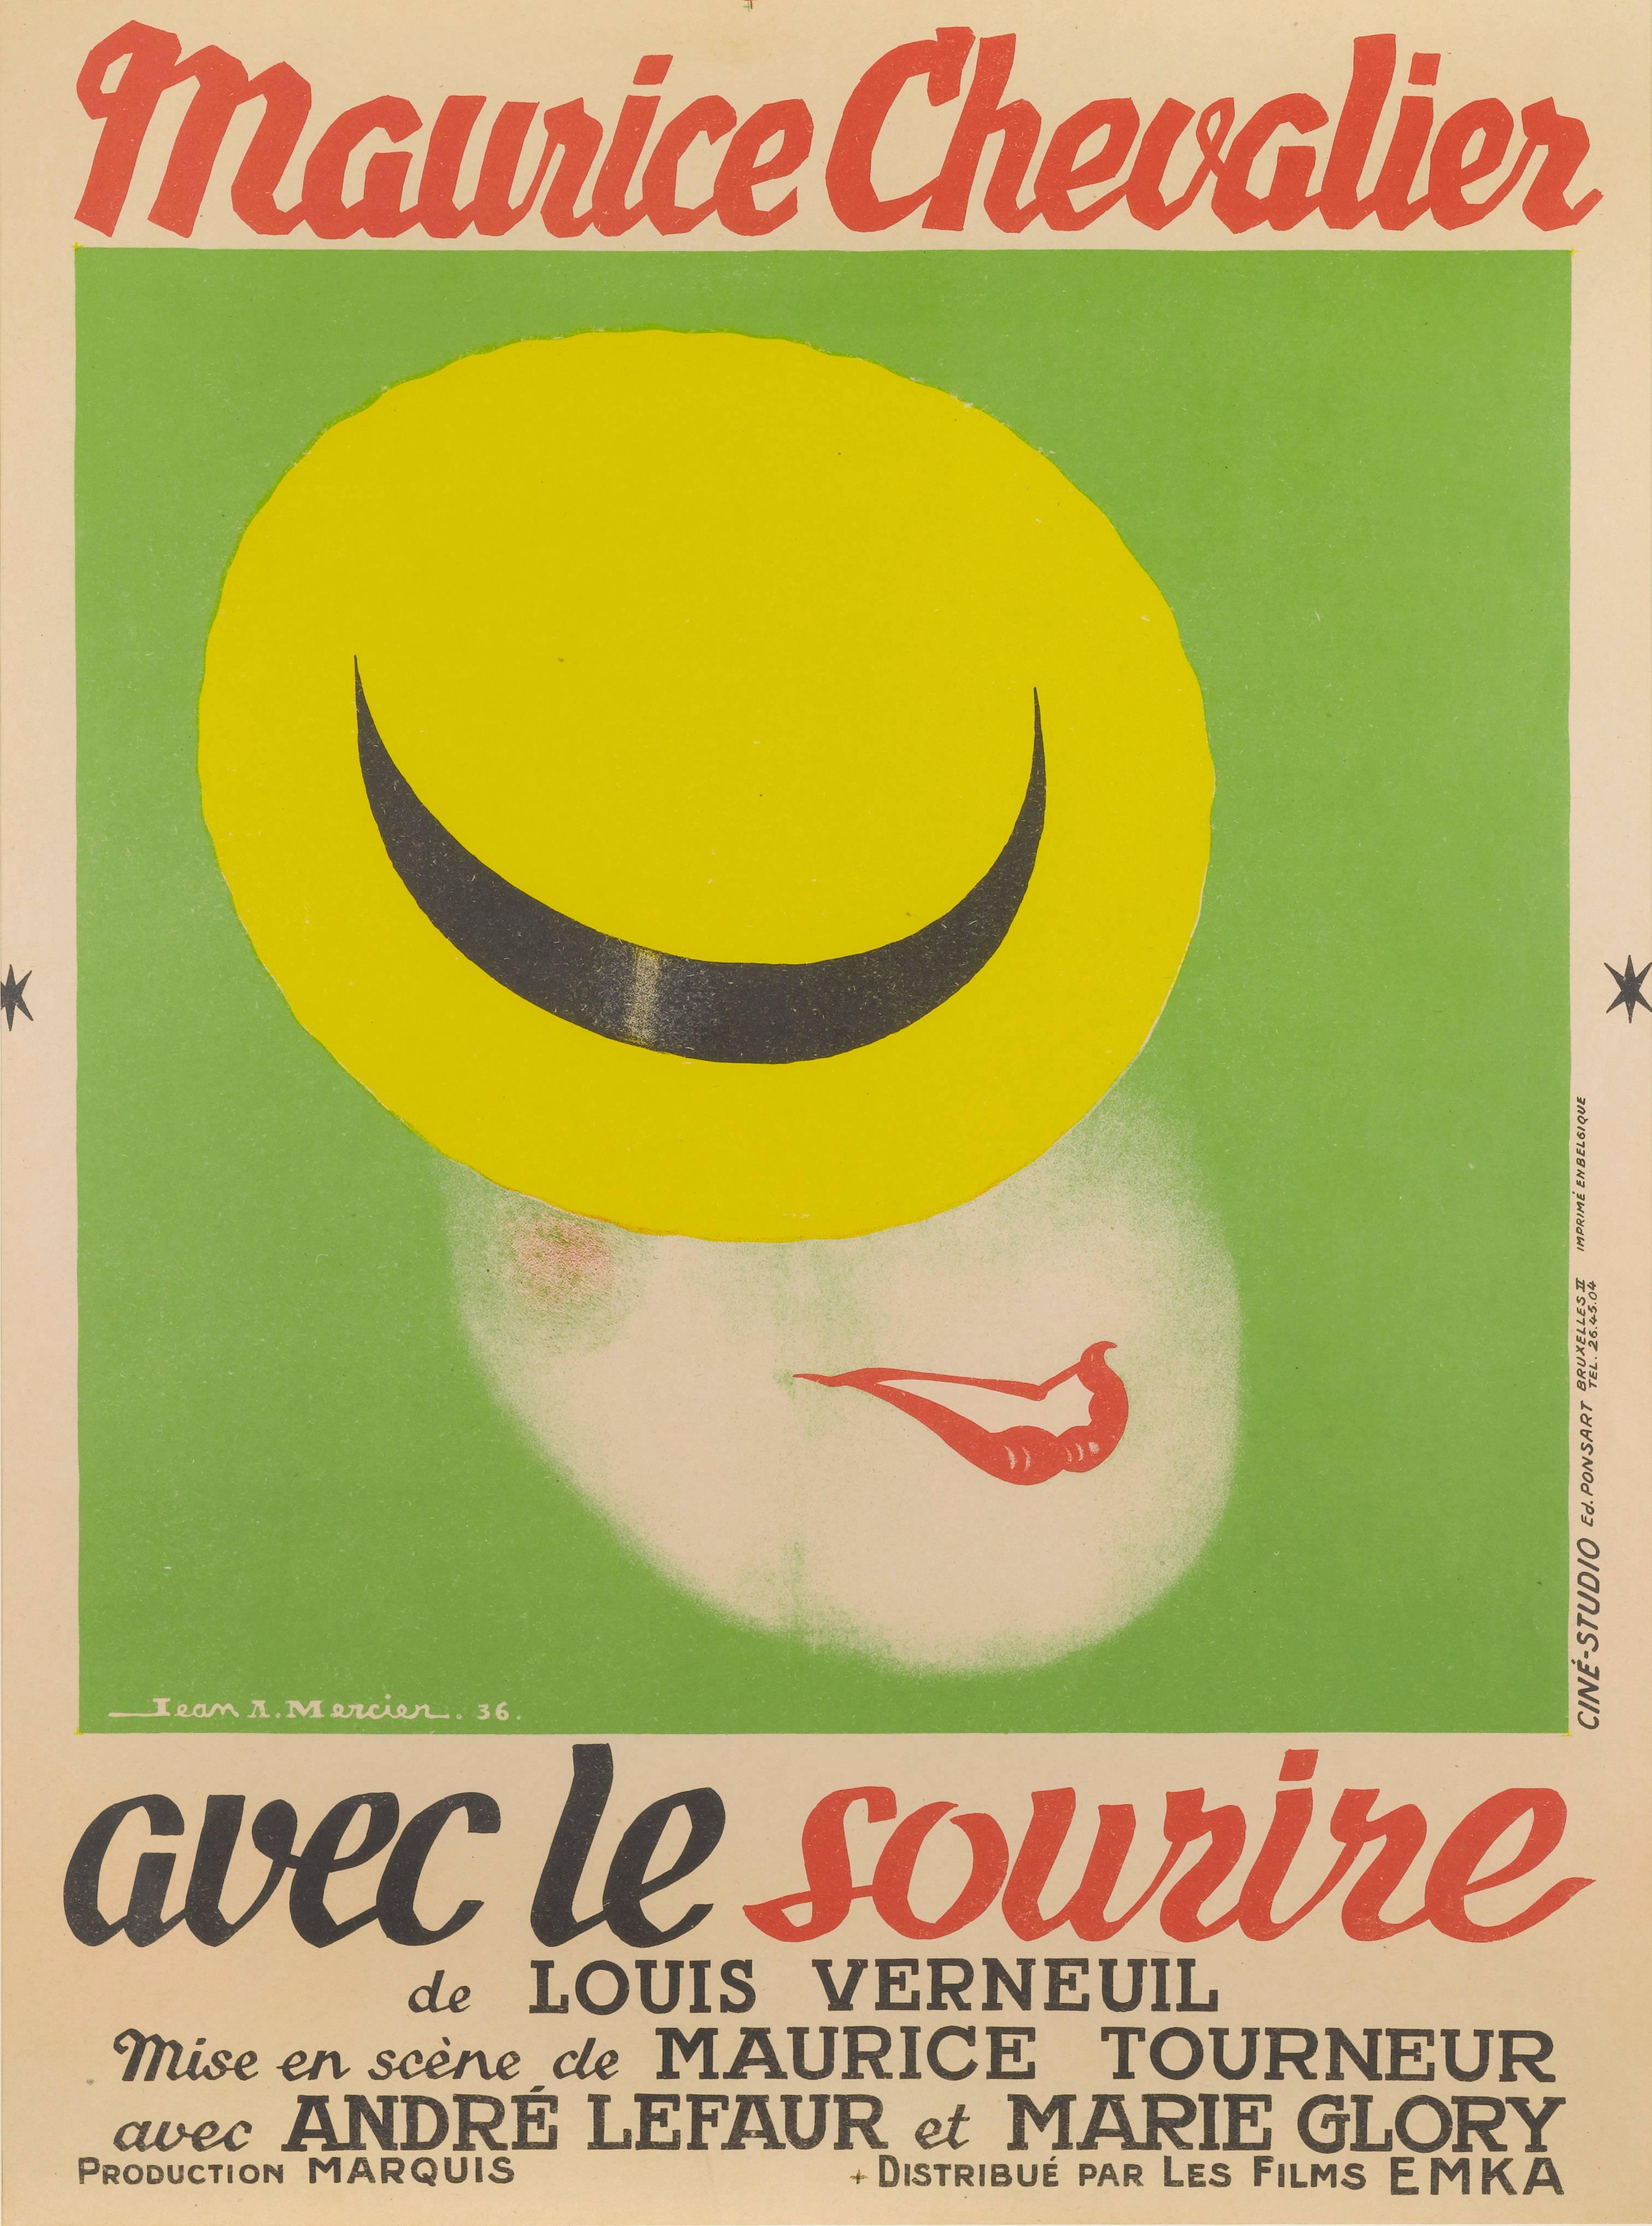 Original French movie poster for Avec le Sourire / with a smile, 1936
staring Maurice Chevalier. The wonderful art work is by Jean-Adrien Mercier (1899-1995) one of Frances most respected poster artists. The size given is before framing the framed